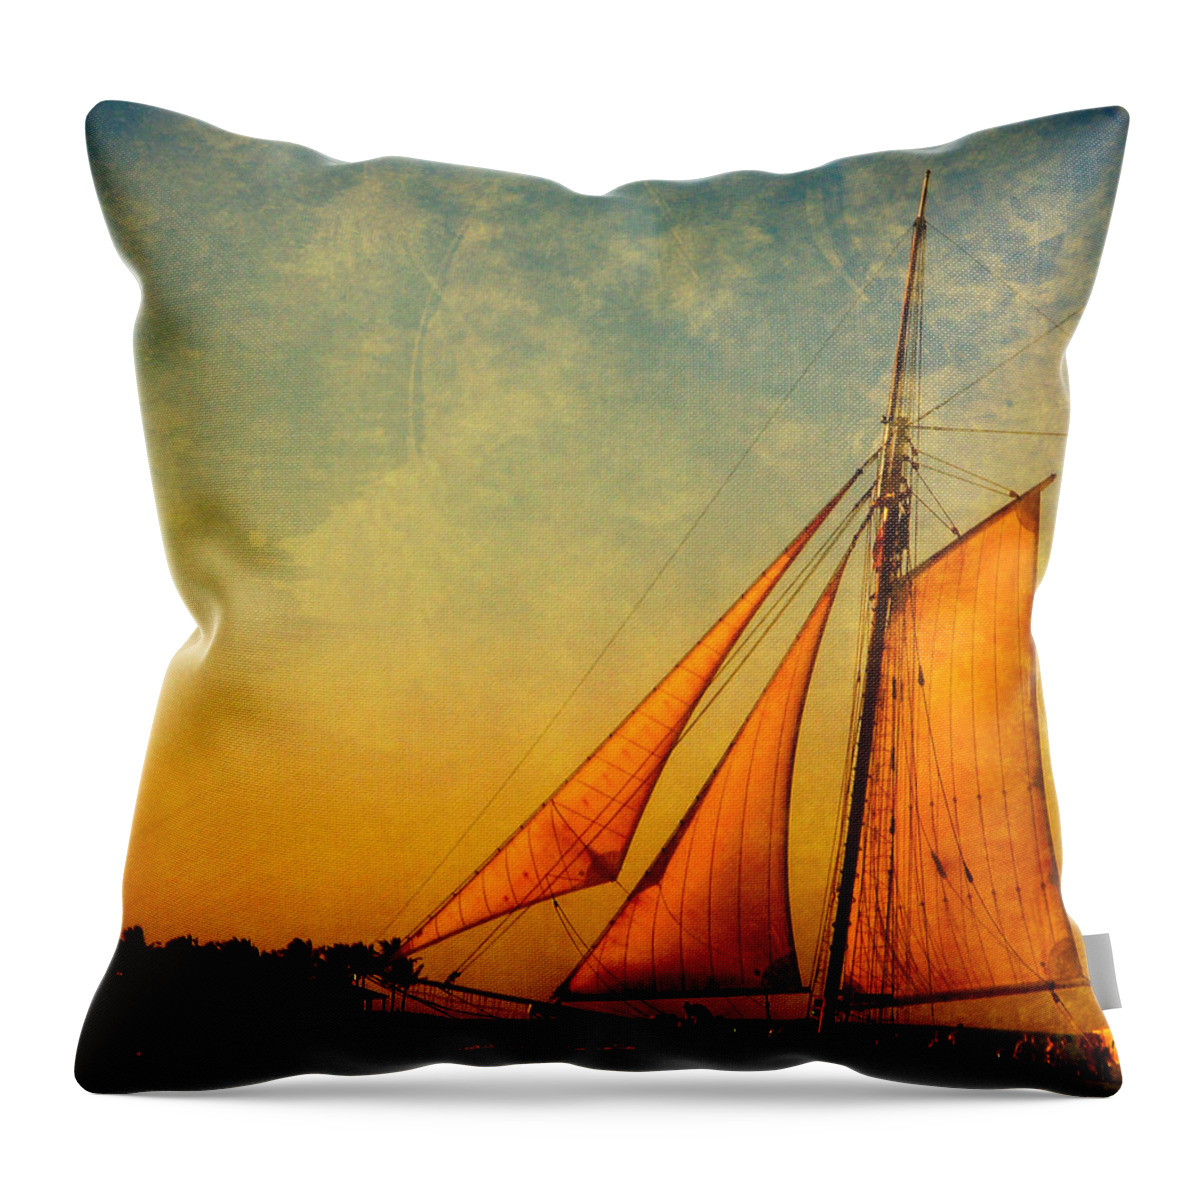 The America Throw Pillow featuring the photograph The America Nr 3 by Susanne Van Hulst